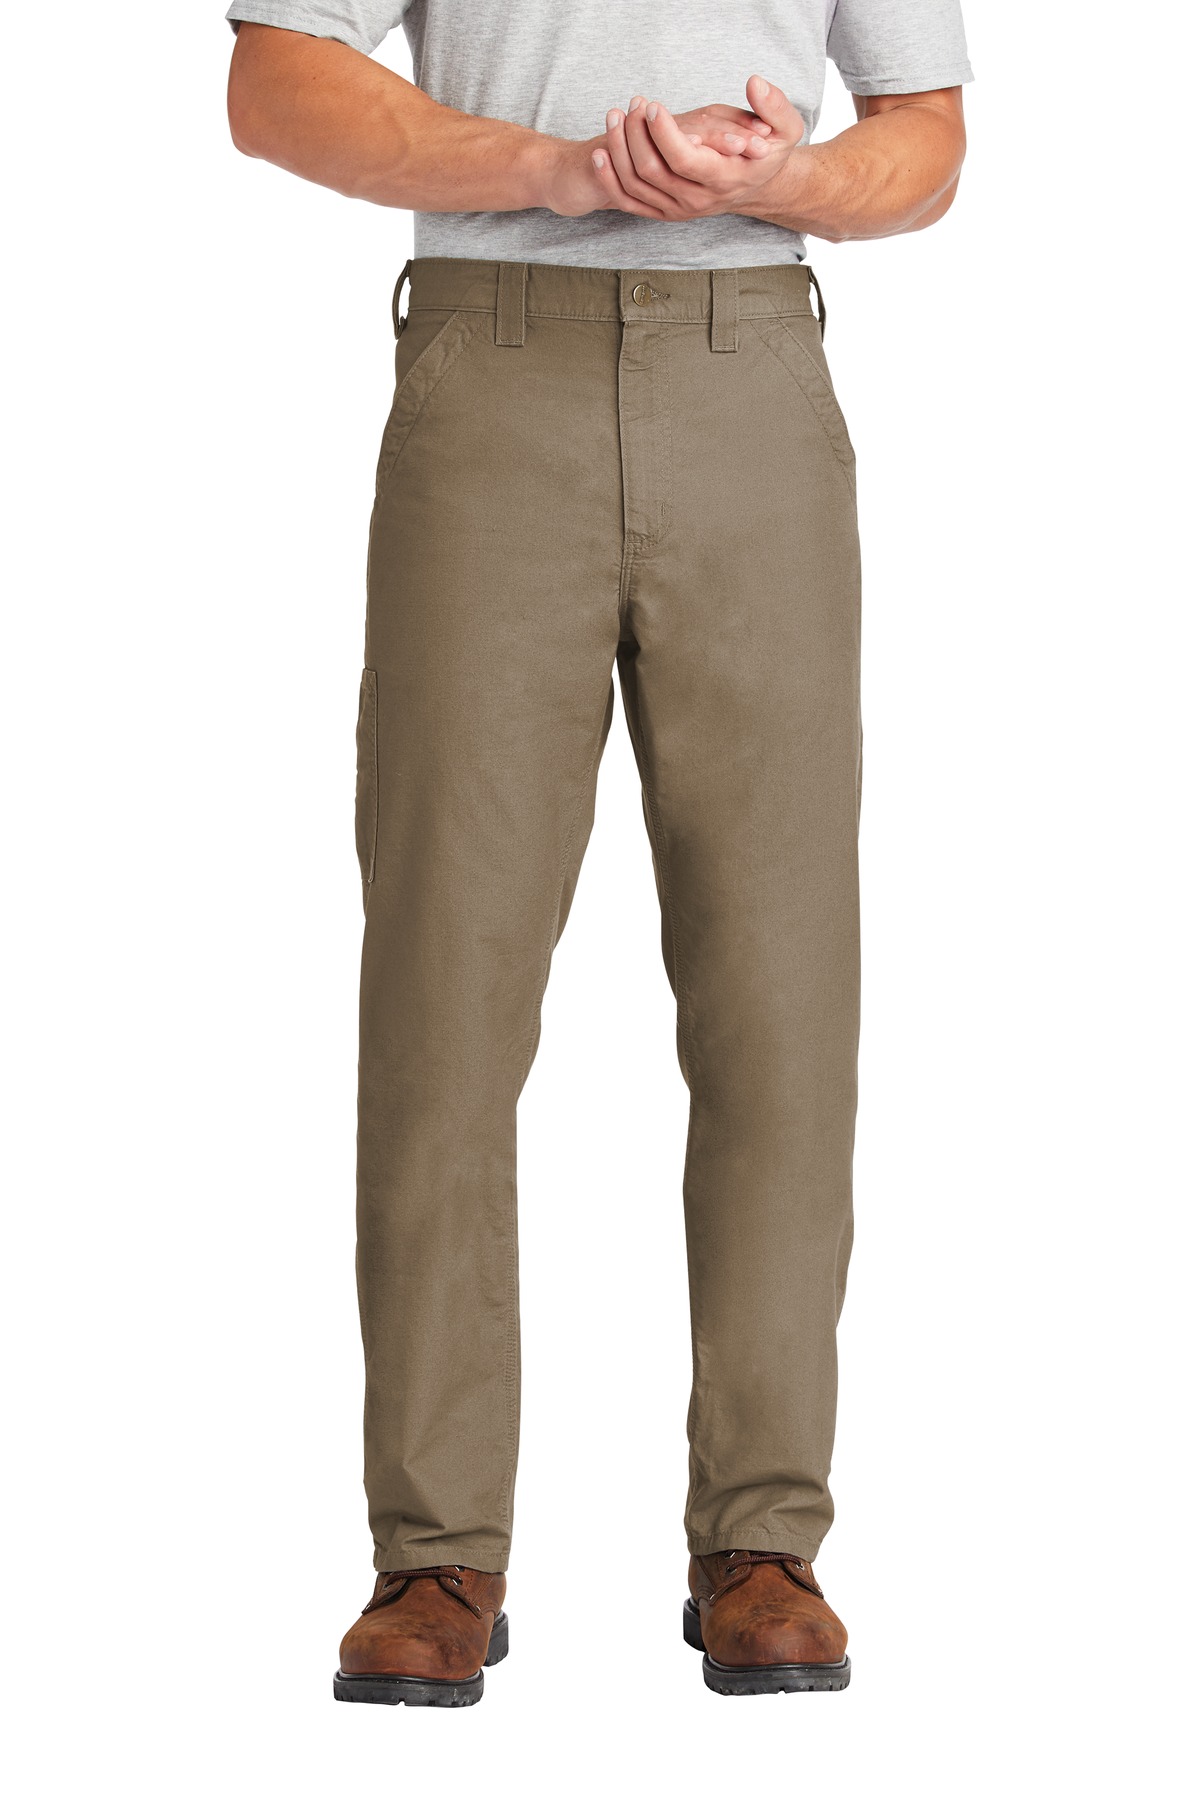 Carhartt Relaxed-Fit Tapered-Leg Jean . CTB17